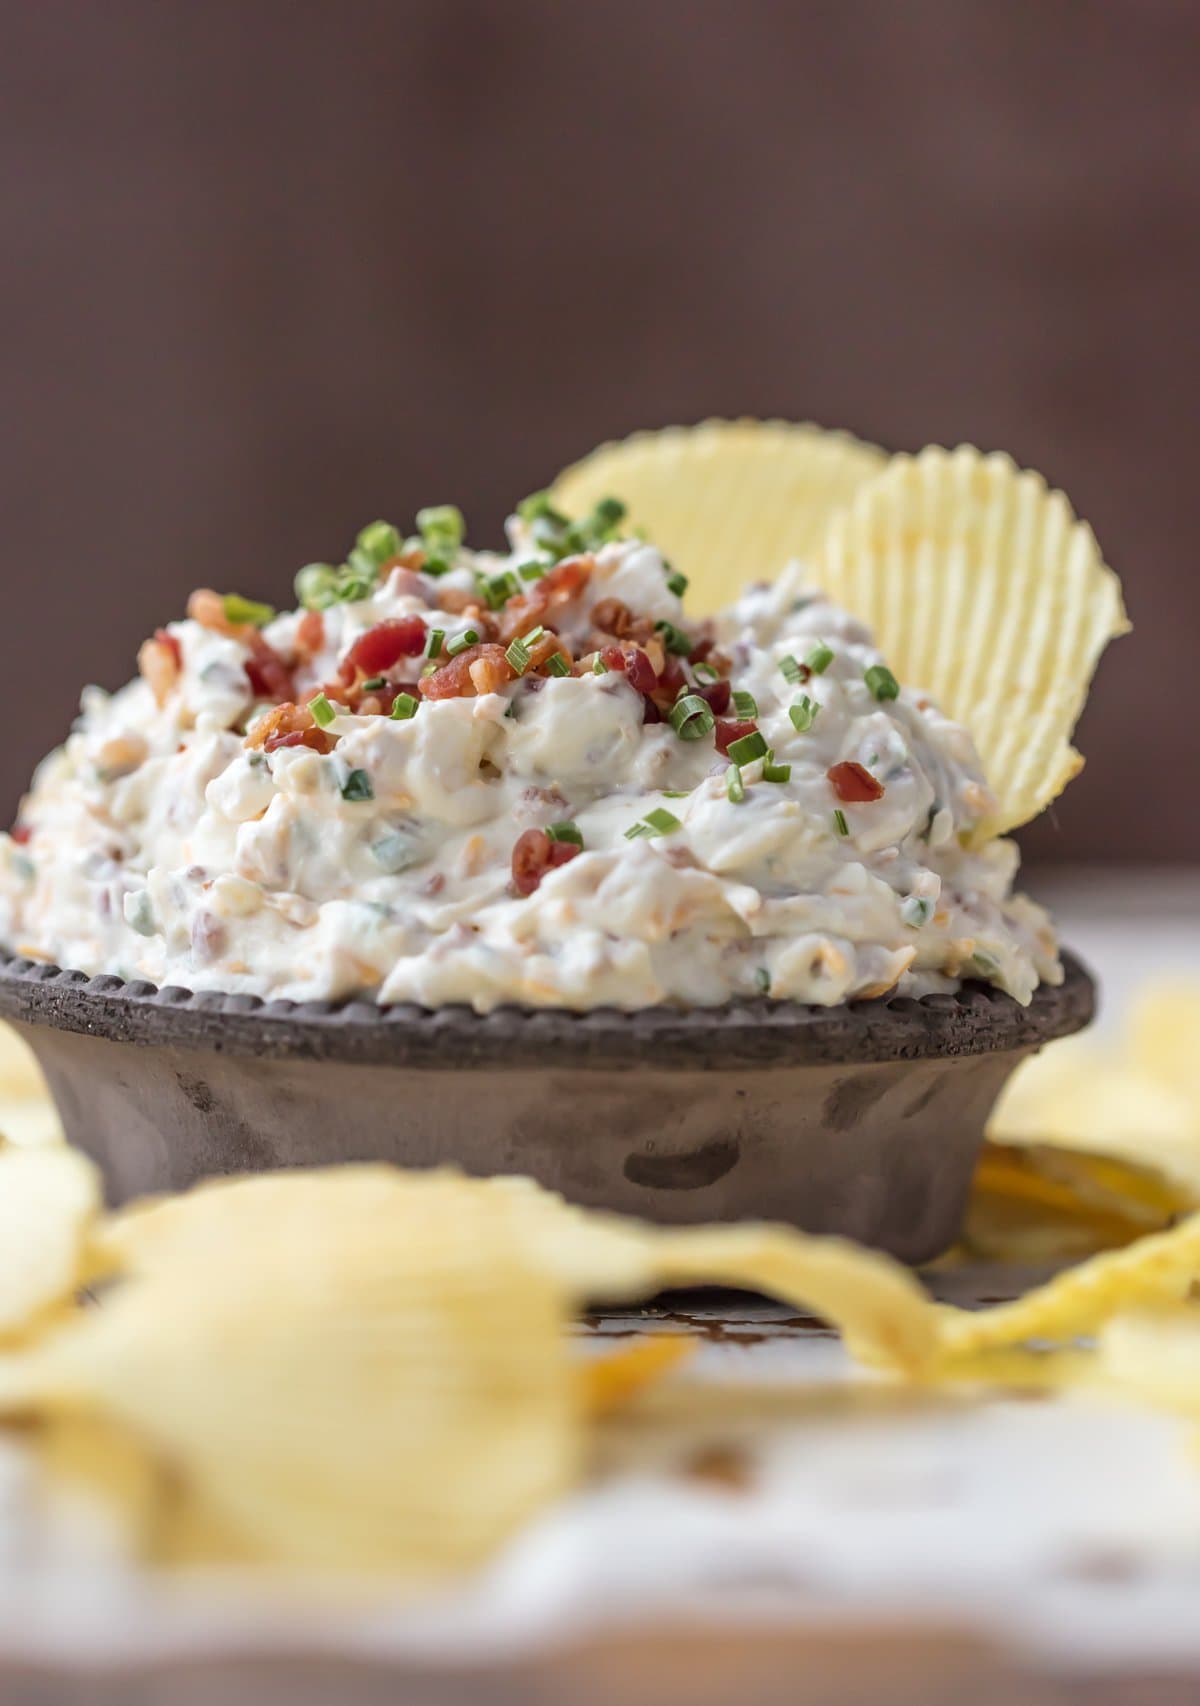 This CARAMELIZED ONION BACON DIP is the ultimate super easy appetizer to make for game day! This sour cream dip is made in minutes and loved by all...so much flavor!